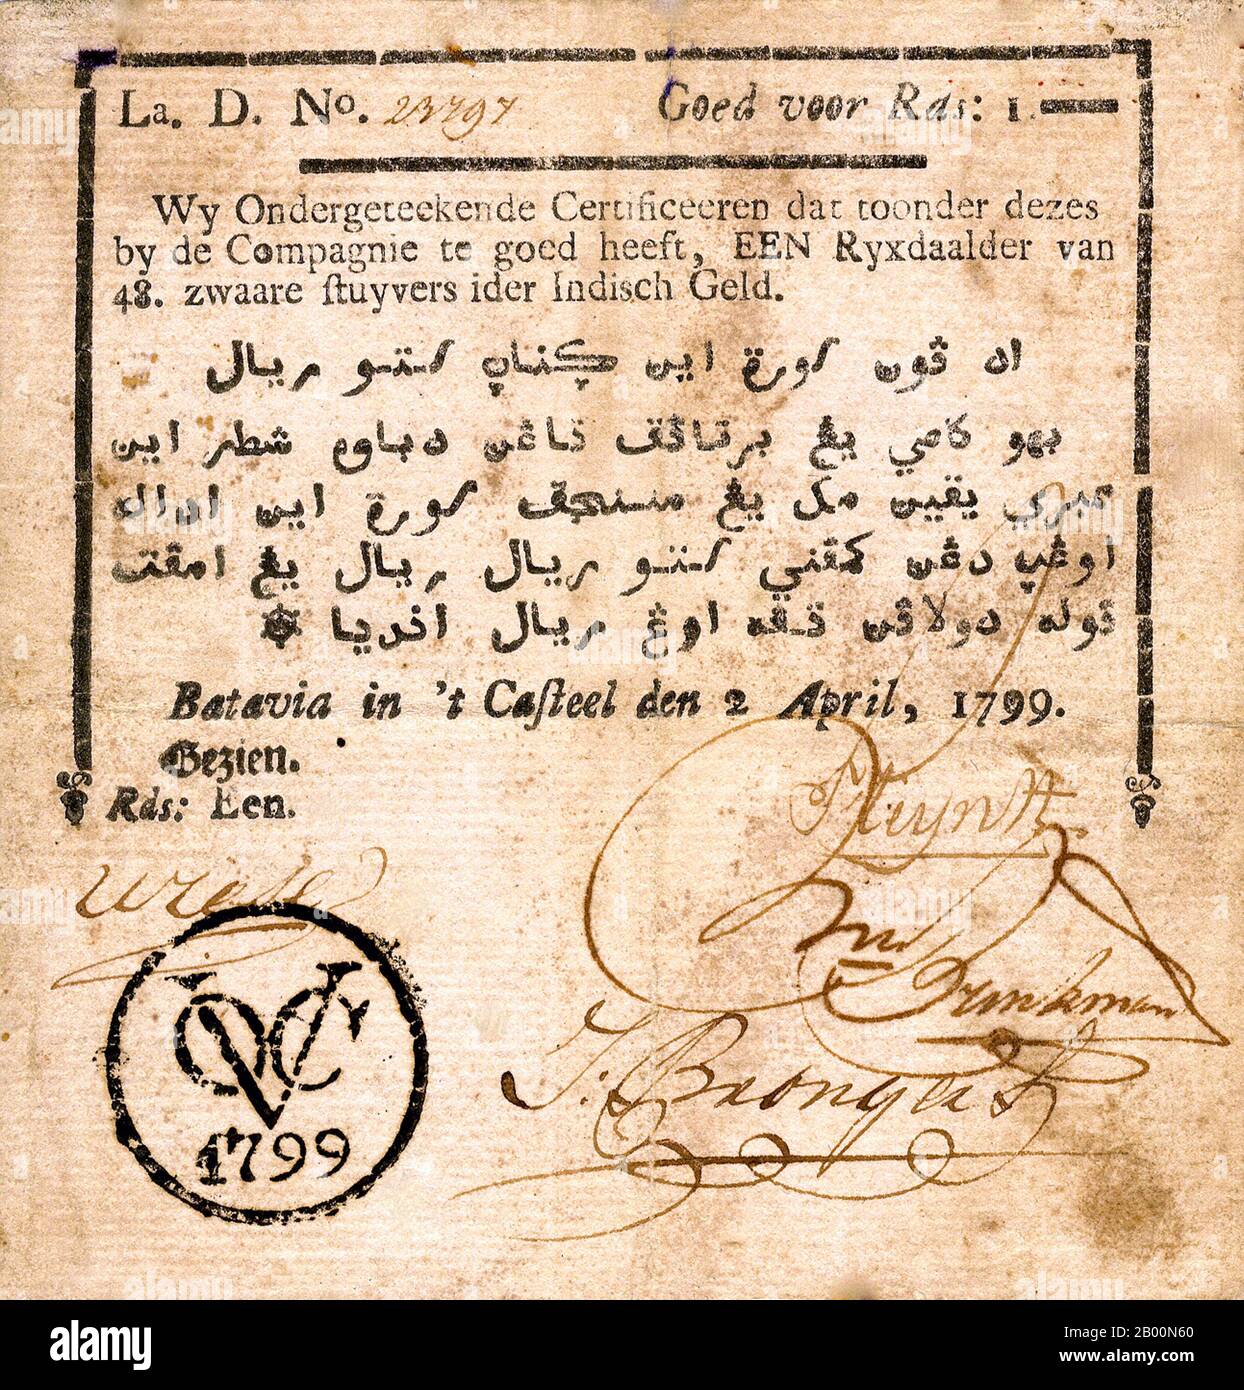 Indonesia: The first paper money of the Dutch East Indies, 1799.  At the end of the 18th century, the first paper money appeared in the Netherlands Indies. The notes were issued by the Dutch East India Company (VOC) that represented the Dutch interests in the East.  The Dutch East Indies, or Netherlands East Indies, (Dutch: Nederlands-Indië; Indonesian: Hindia-Belanda) was the Dutch colony that became modern Indonesia following World War II. It was formed from the nationalised colonies of the former Dutch East India Company that came under the administration of the Netherlands in 1800. Stock Photo